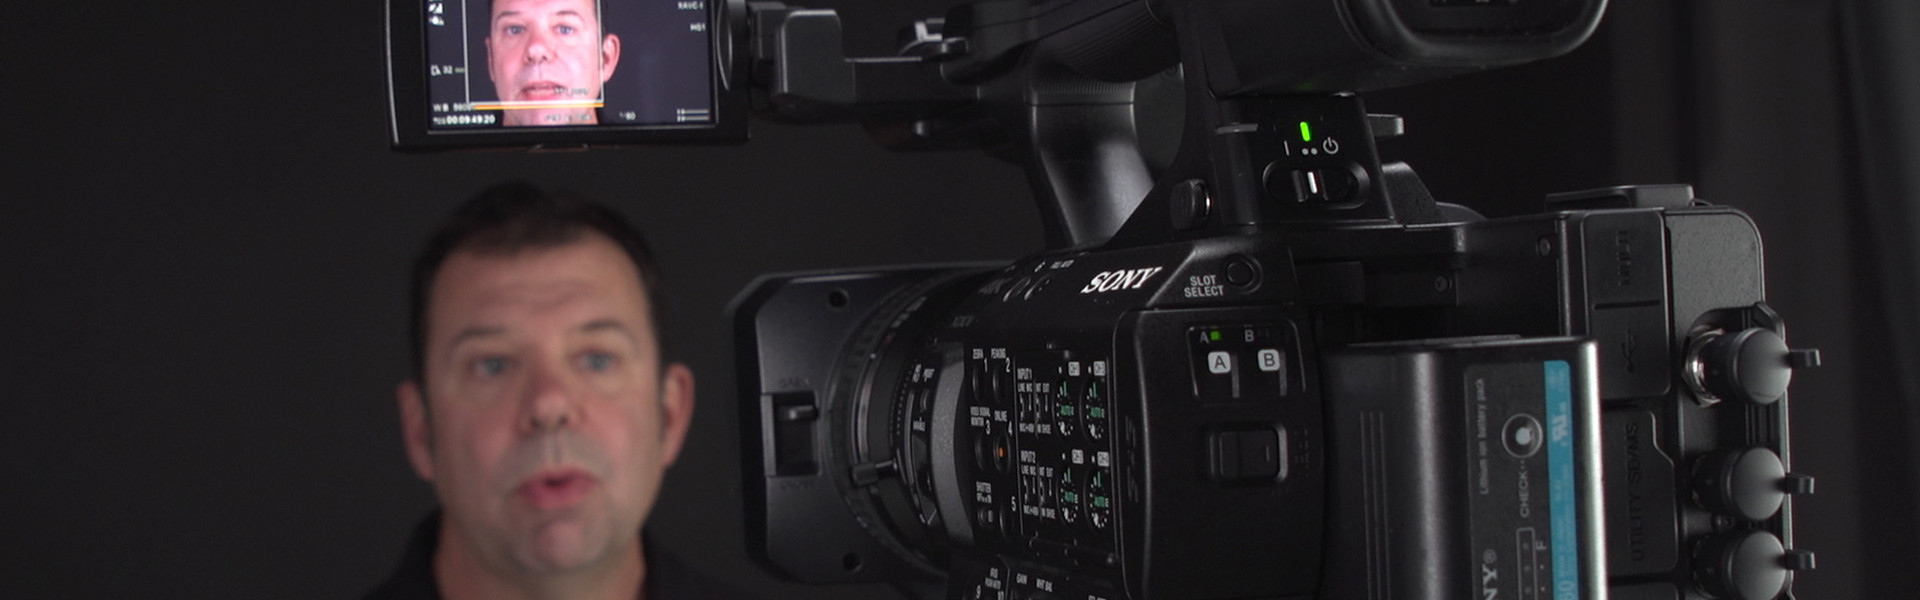 Header image for article At the Bench: Sony Z280 Camcorder